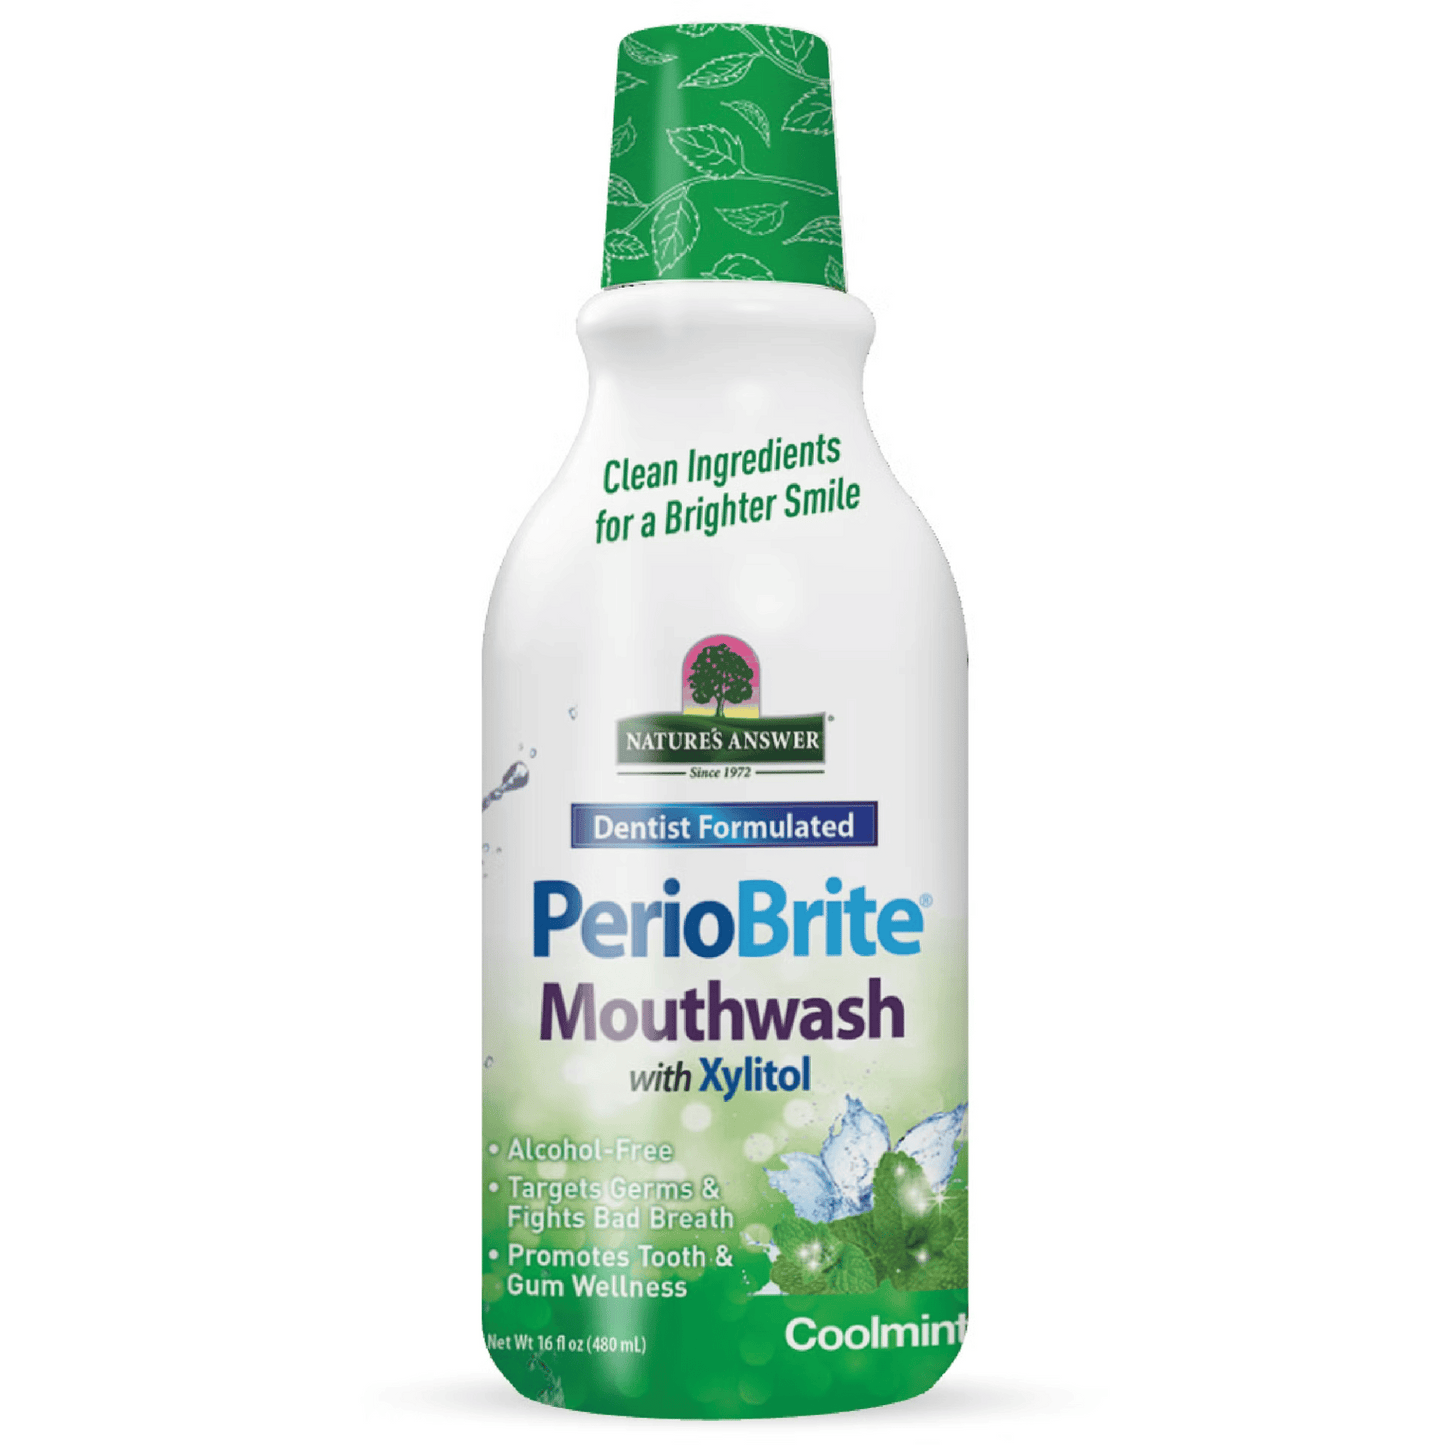 Primary Image of PerioBrite Cool Mint Mouthwash